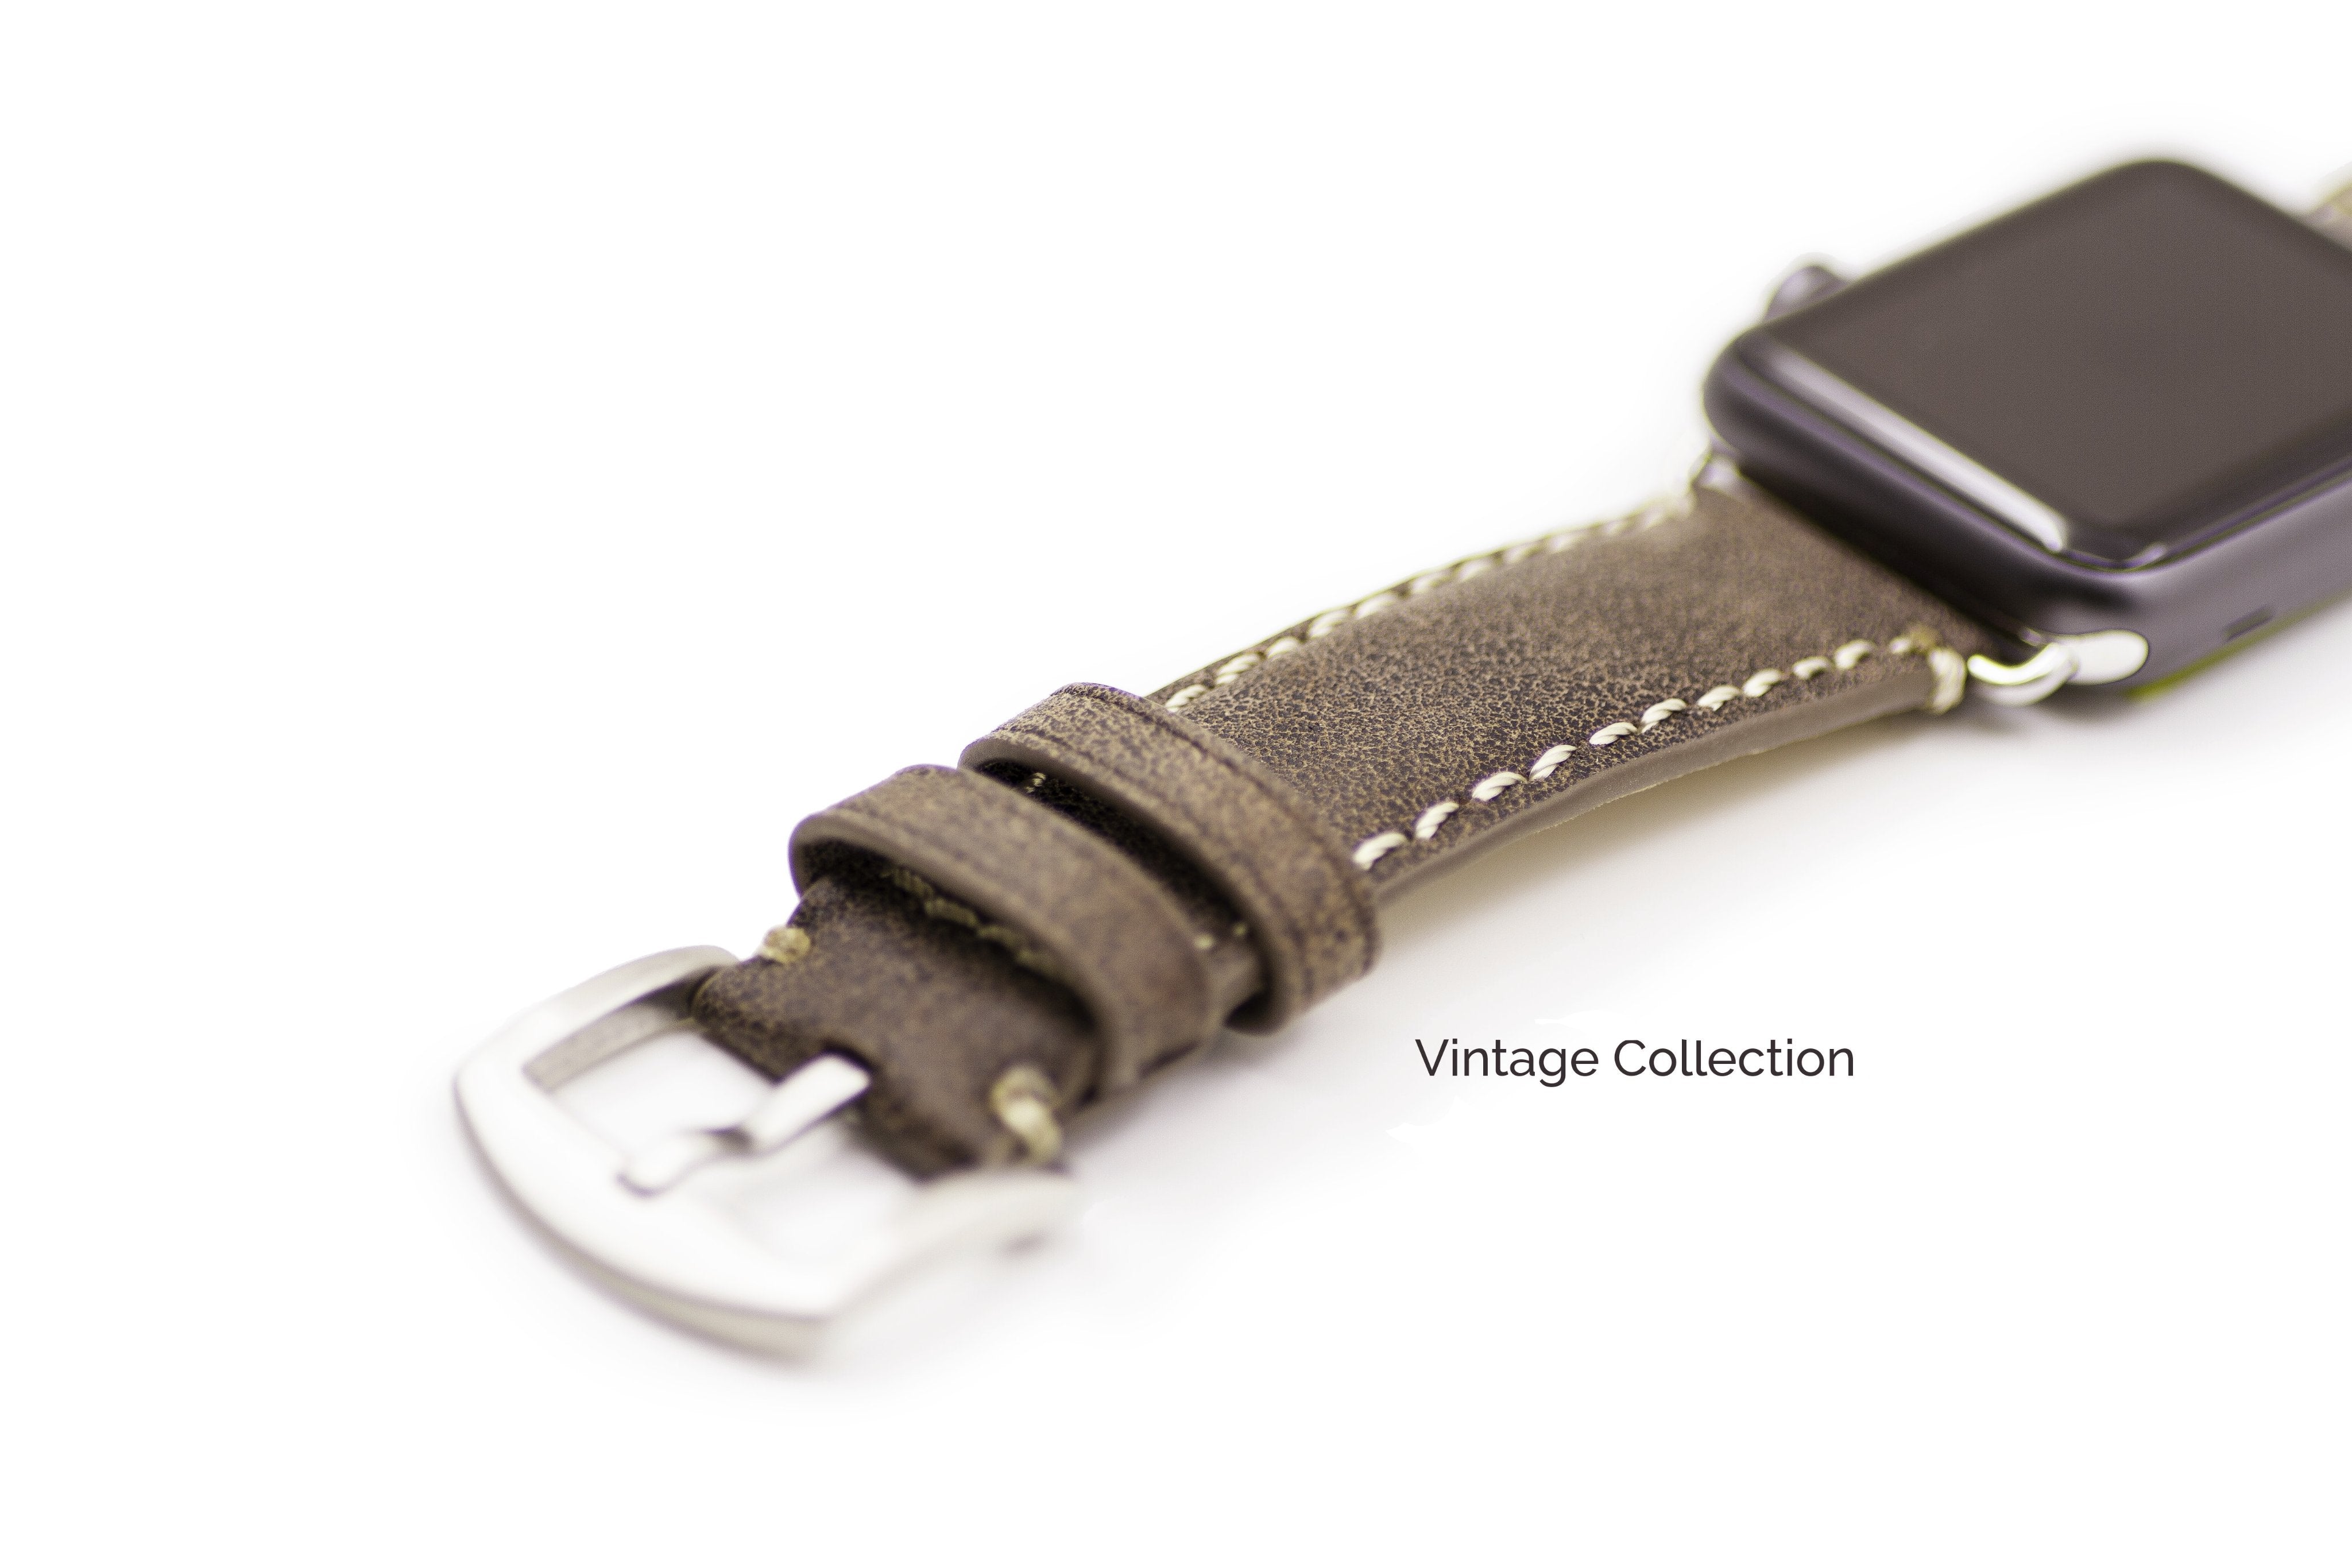 Vintage Collection - Handcrafted Apple Watch Band-Watch Band- phone case - phone cases- phone cover- iphone cover- iphone case- iphone cases- leather case- leather cases- DIYCASE - custom case - leather cover - hand strap case - croco pattern case - snake pattern case - carbon fiber phone case - phone case brand - unique phone case - high quality - phone case brand - protective case - buy phone case hong kong - online buy phone case - iphone‎手機殼 - 客製化手機殼 - samsung ‎手機殼 - 香港手機殼 - 買電話殼